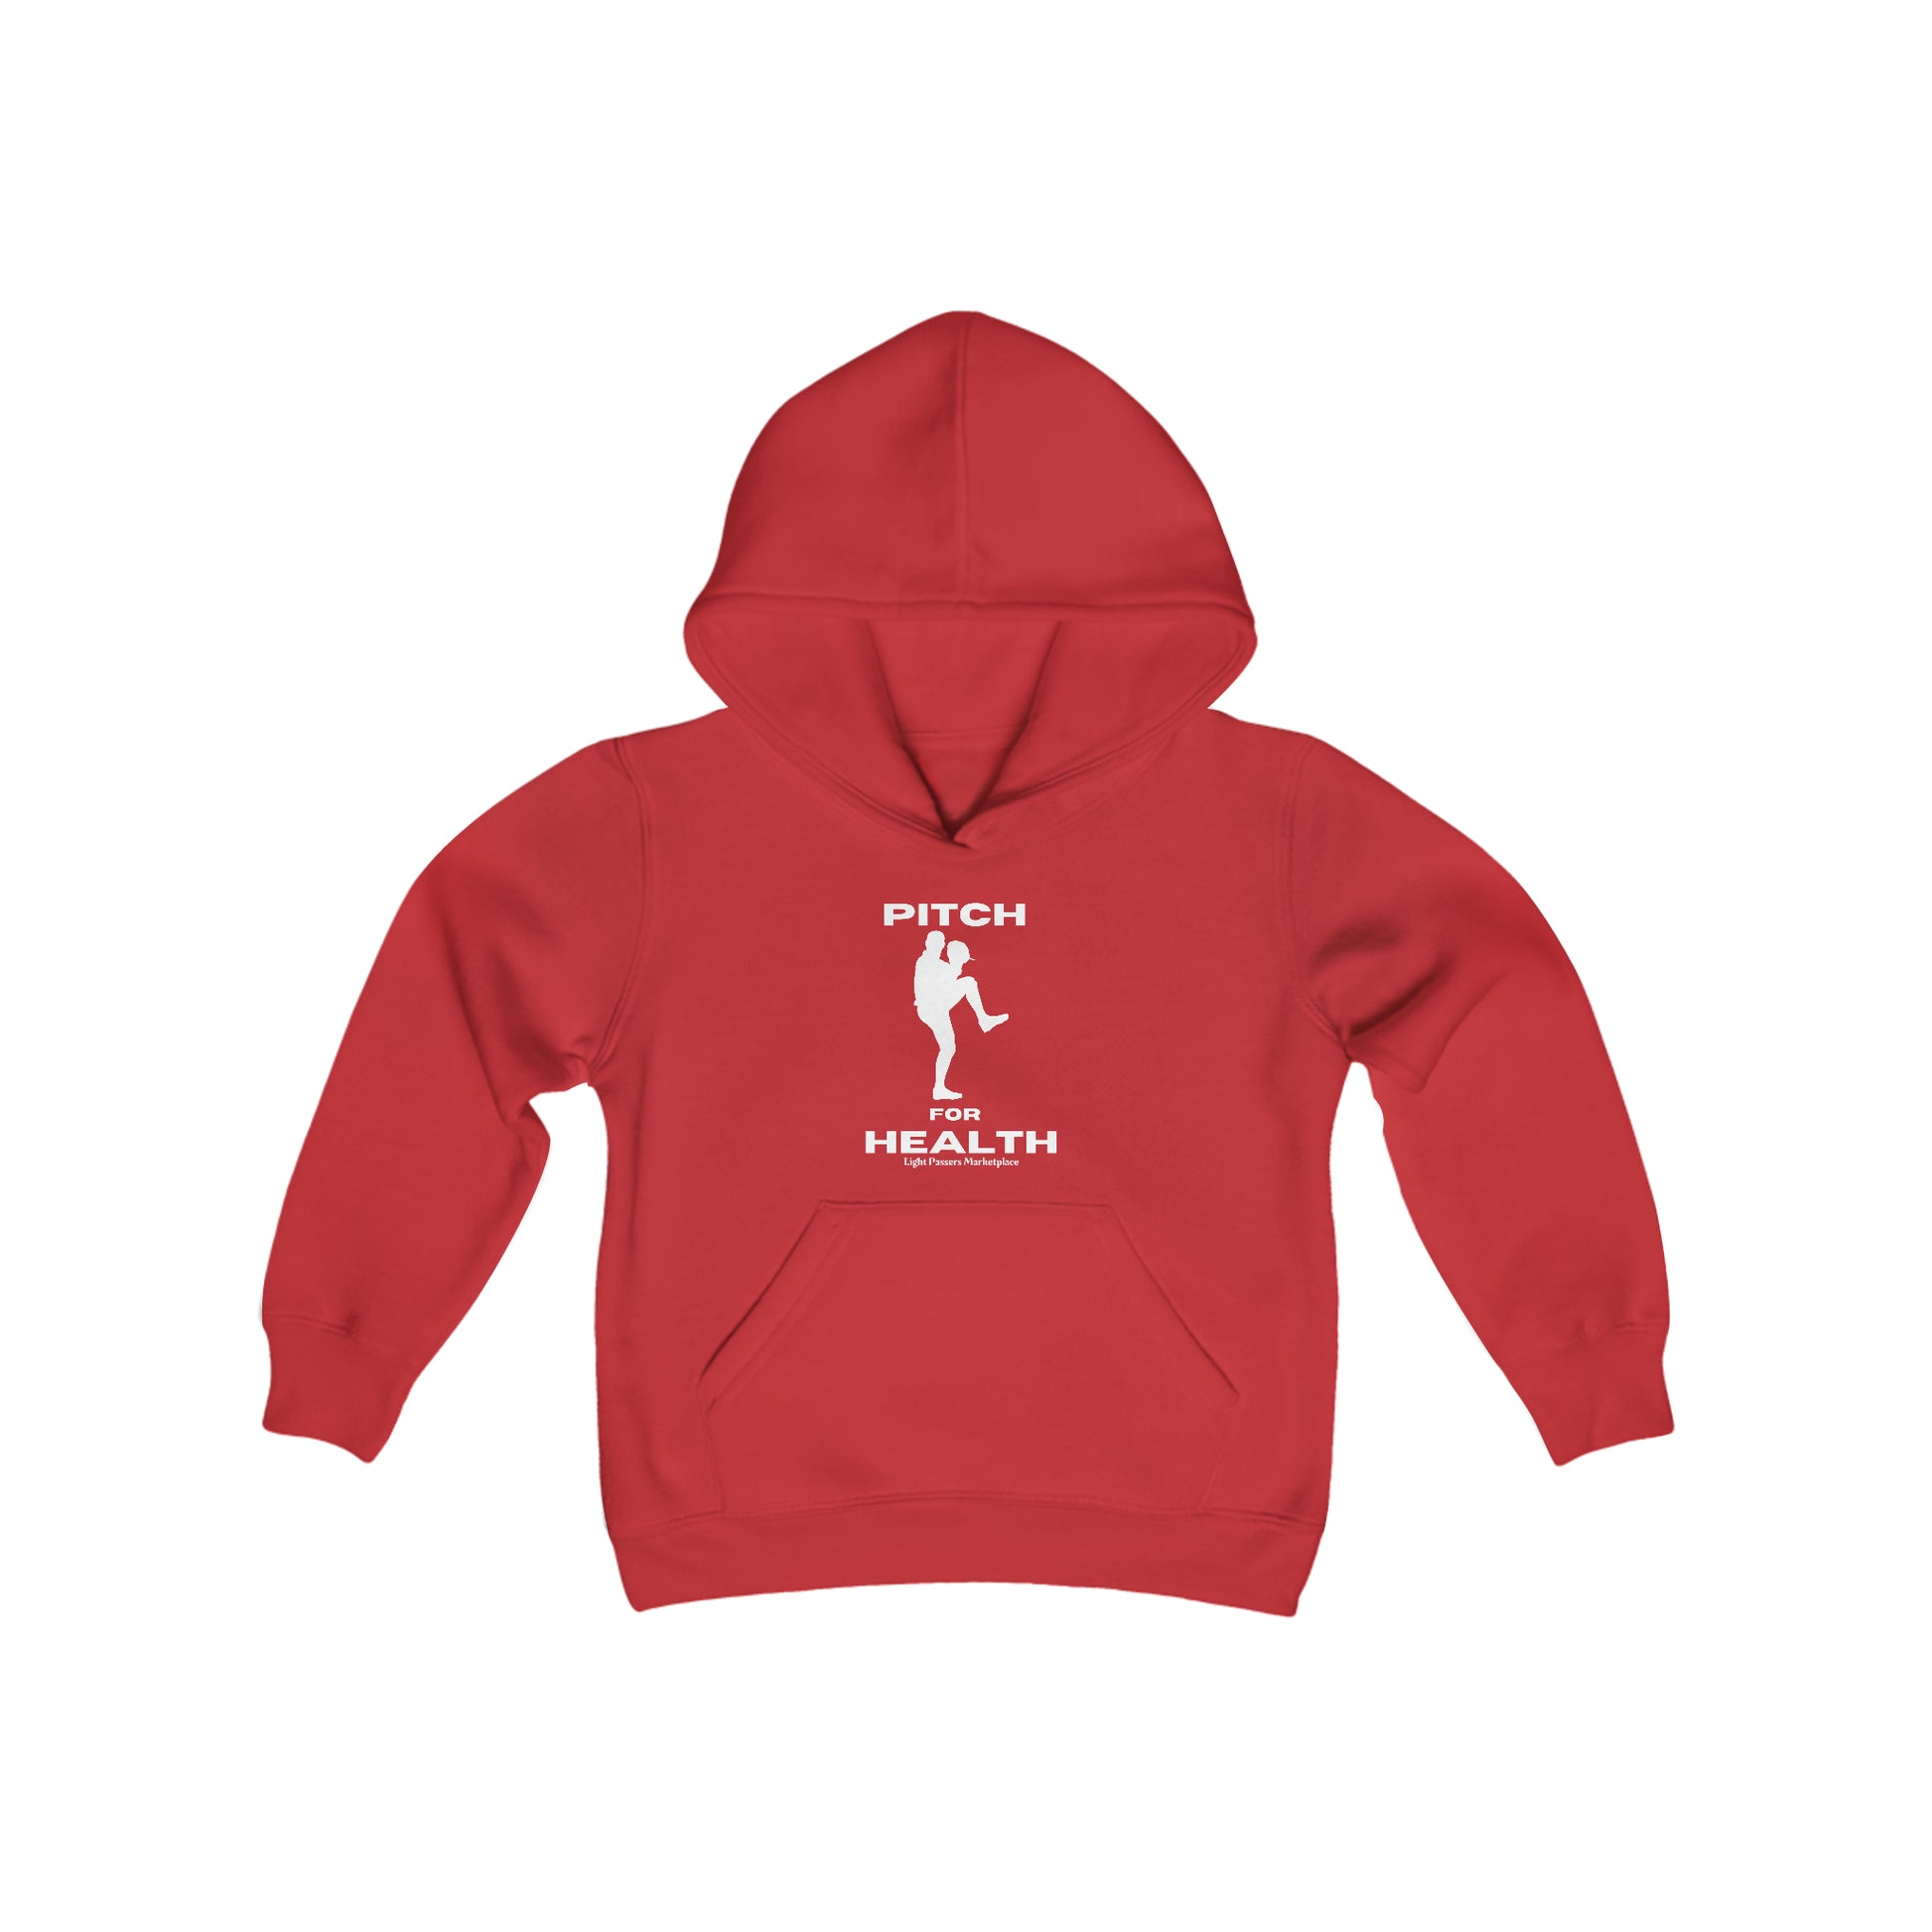 A red youth blend hooded sweatshirt with kangaroo pocket, made of soft preshrunk fleece (50% cotton, 50% polyester). Features reinforced neck and twill taping.